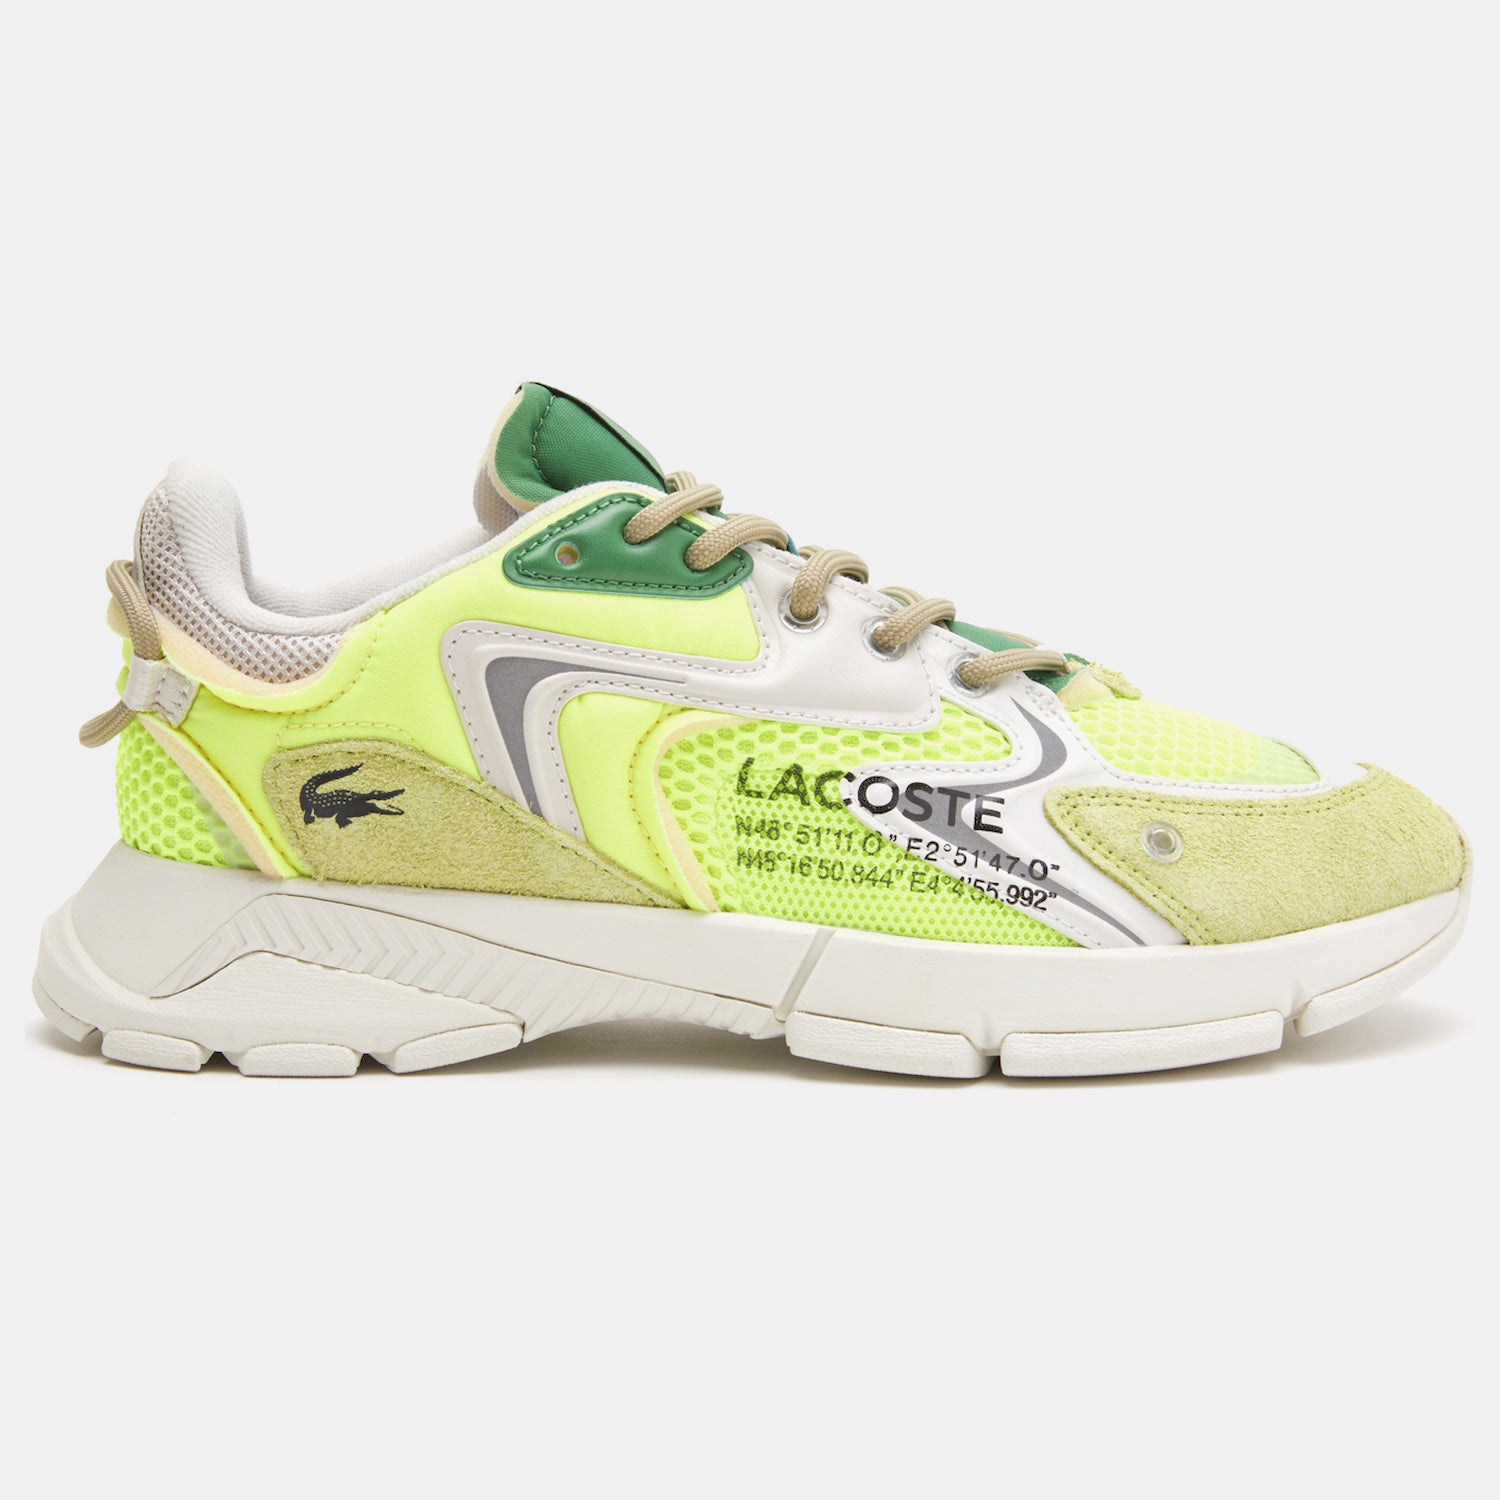 Lacoste Sapatilhas Sneakers Shoes L003 Yellow Whi Amarelo Branco_shot1